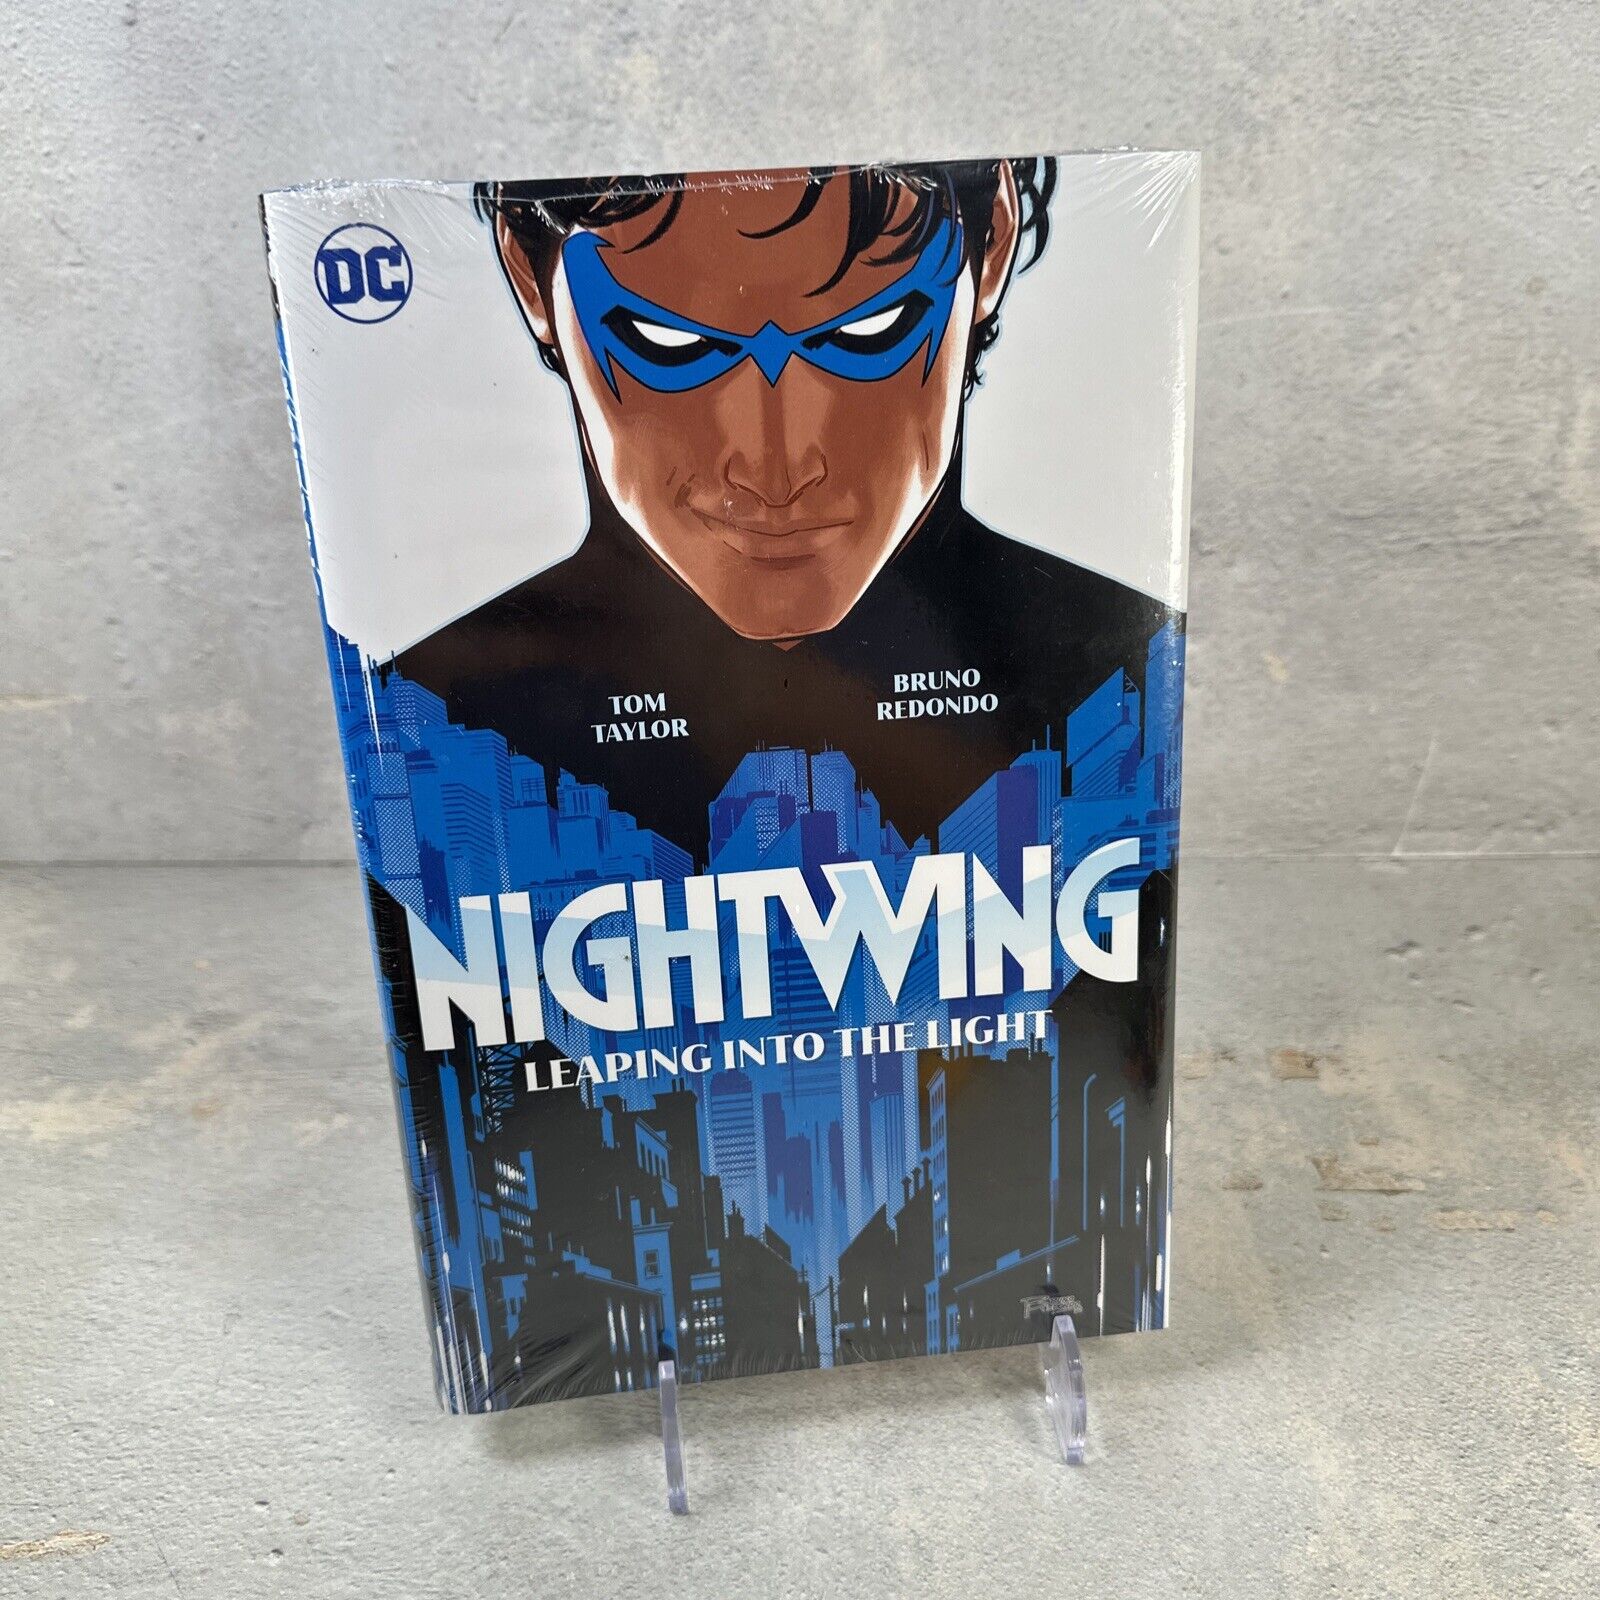 Nightwing Vol.1: Leaping Into the Light (Hardback) Sealed New